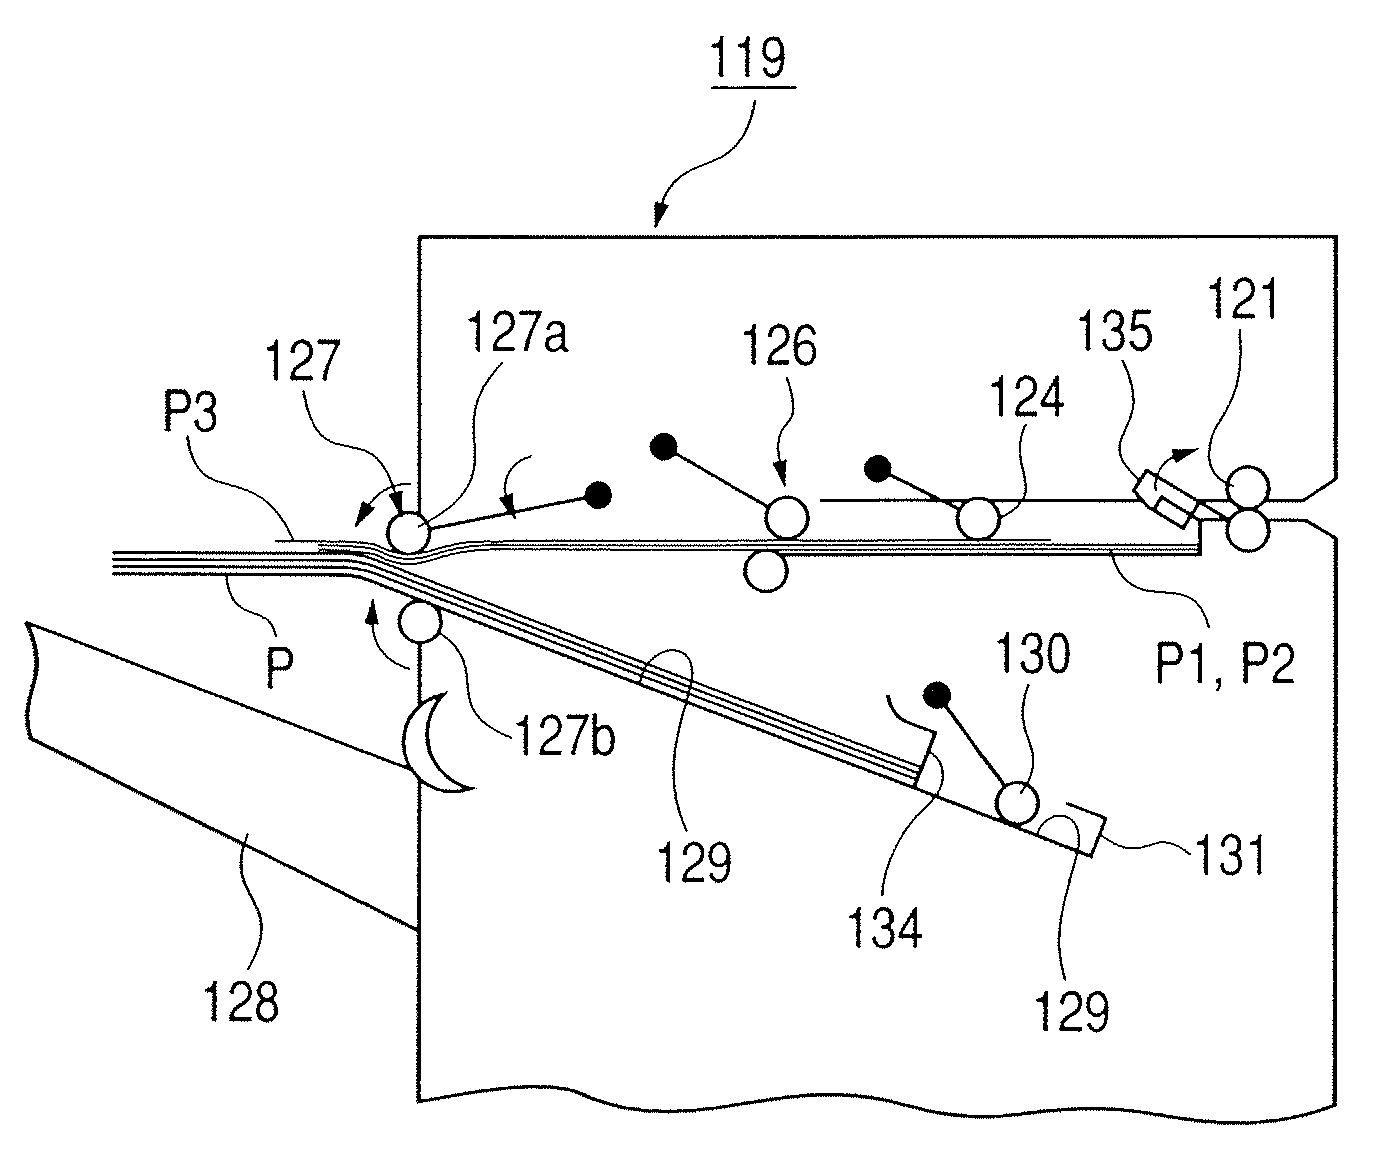 Sheet processing apparatus with controller for controlling sheet supply unit